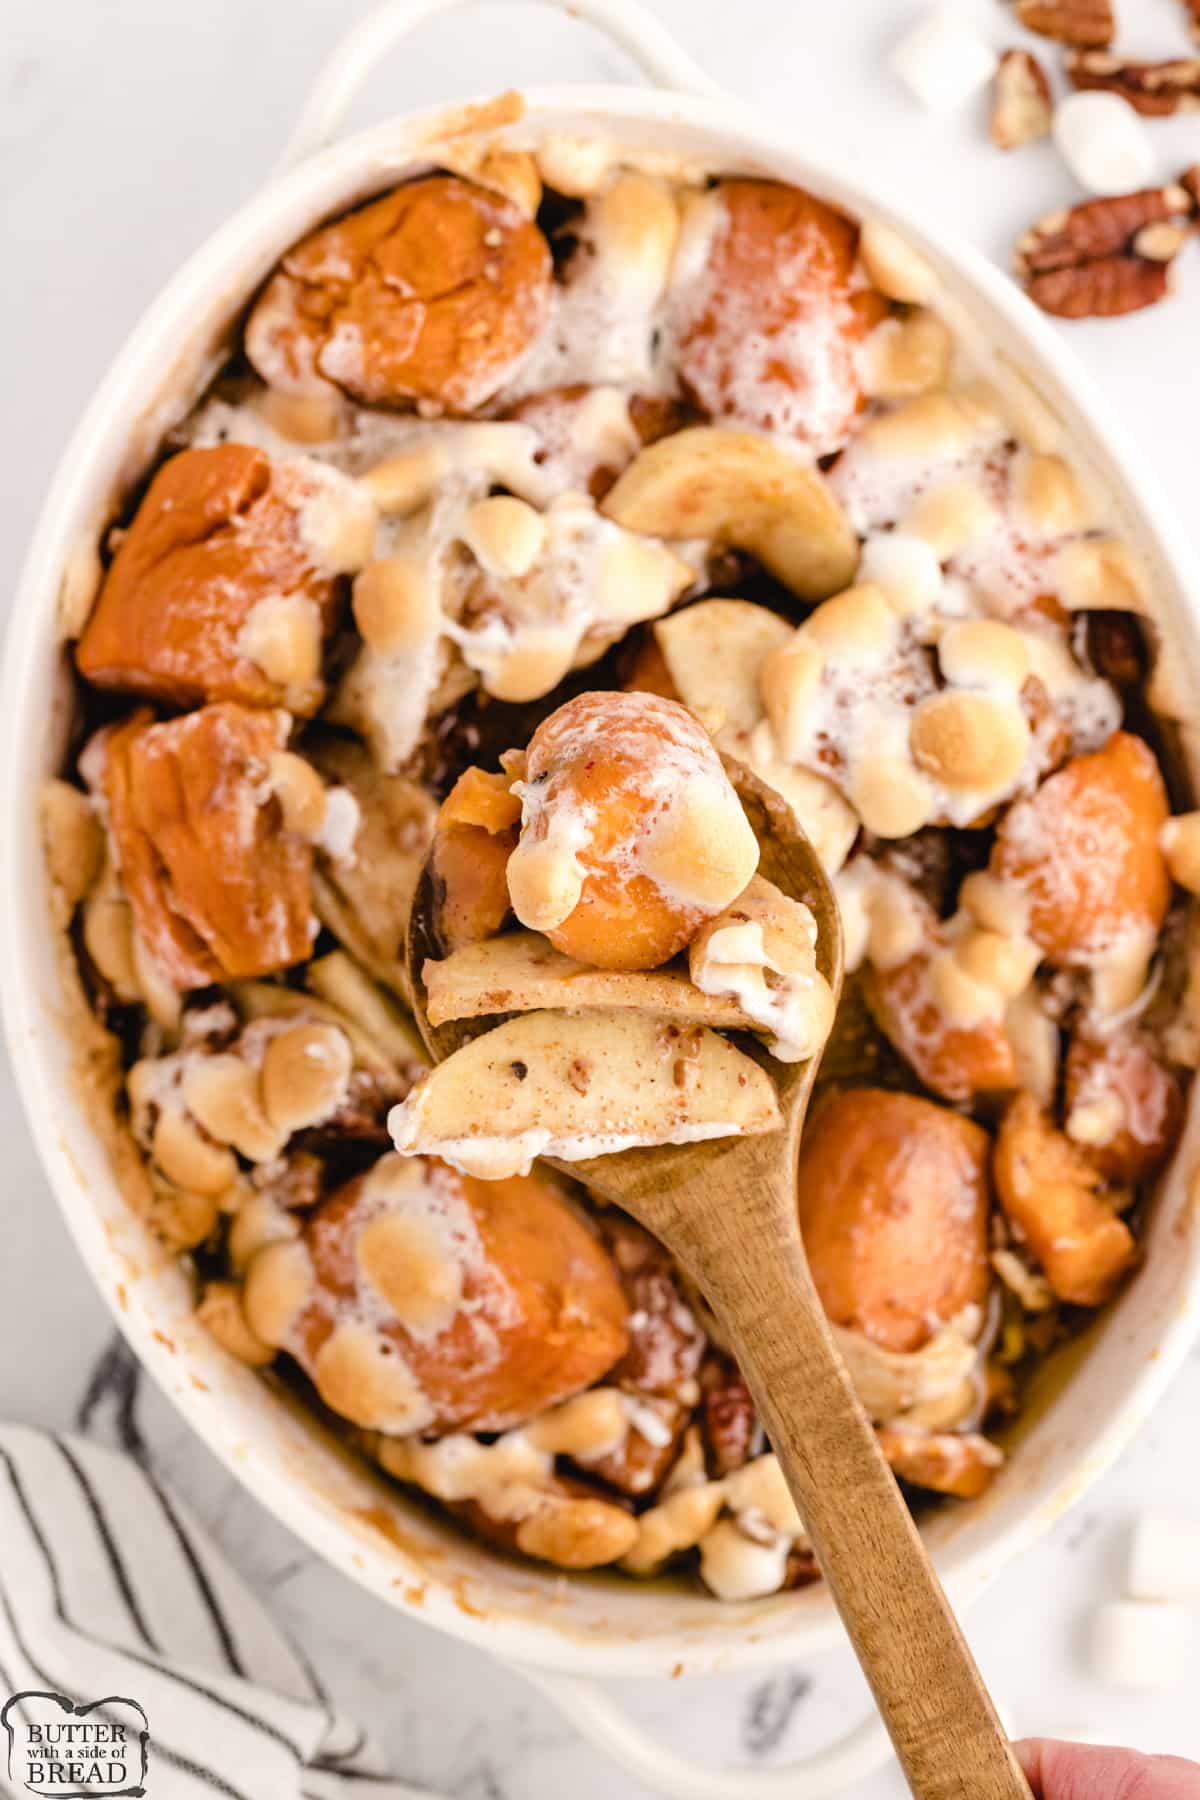 Sweet potato recipe with apples and marshmallows